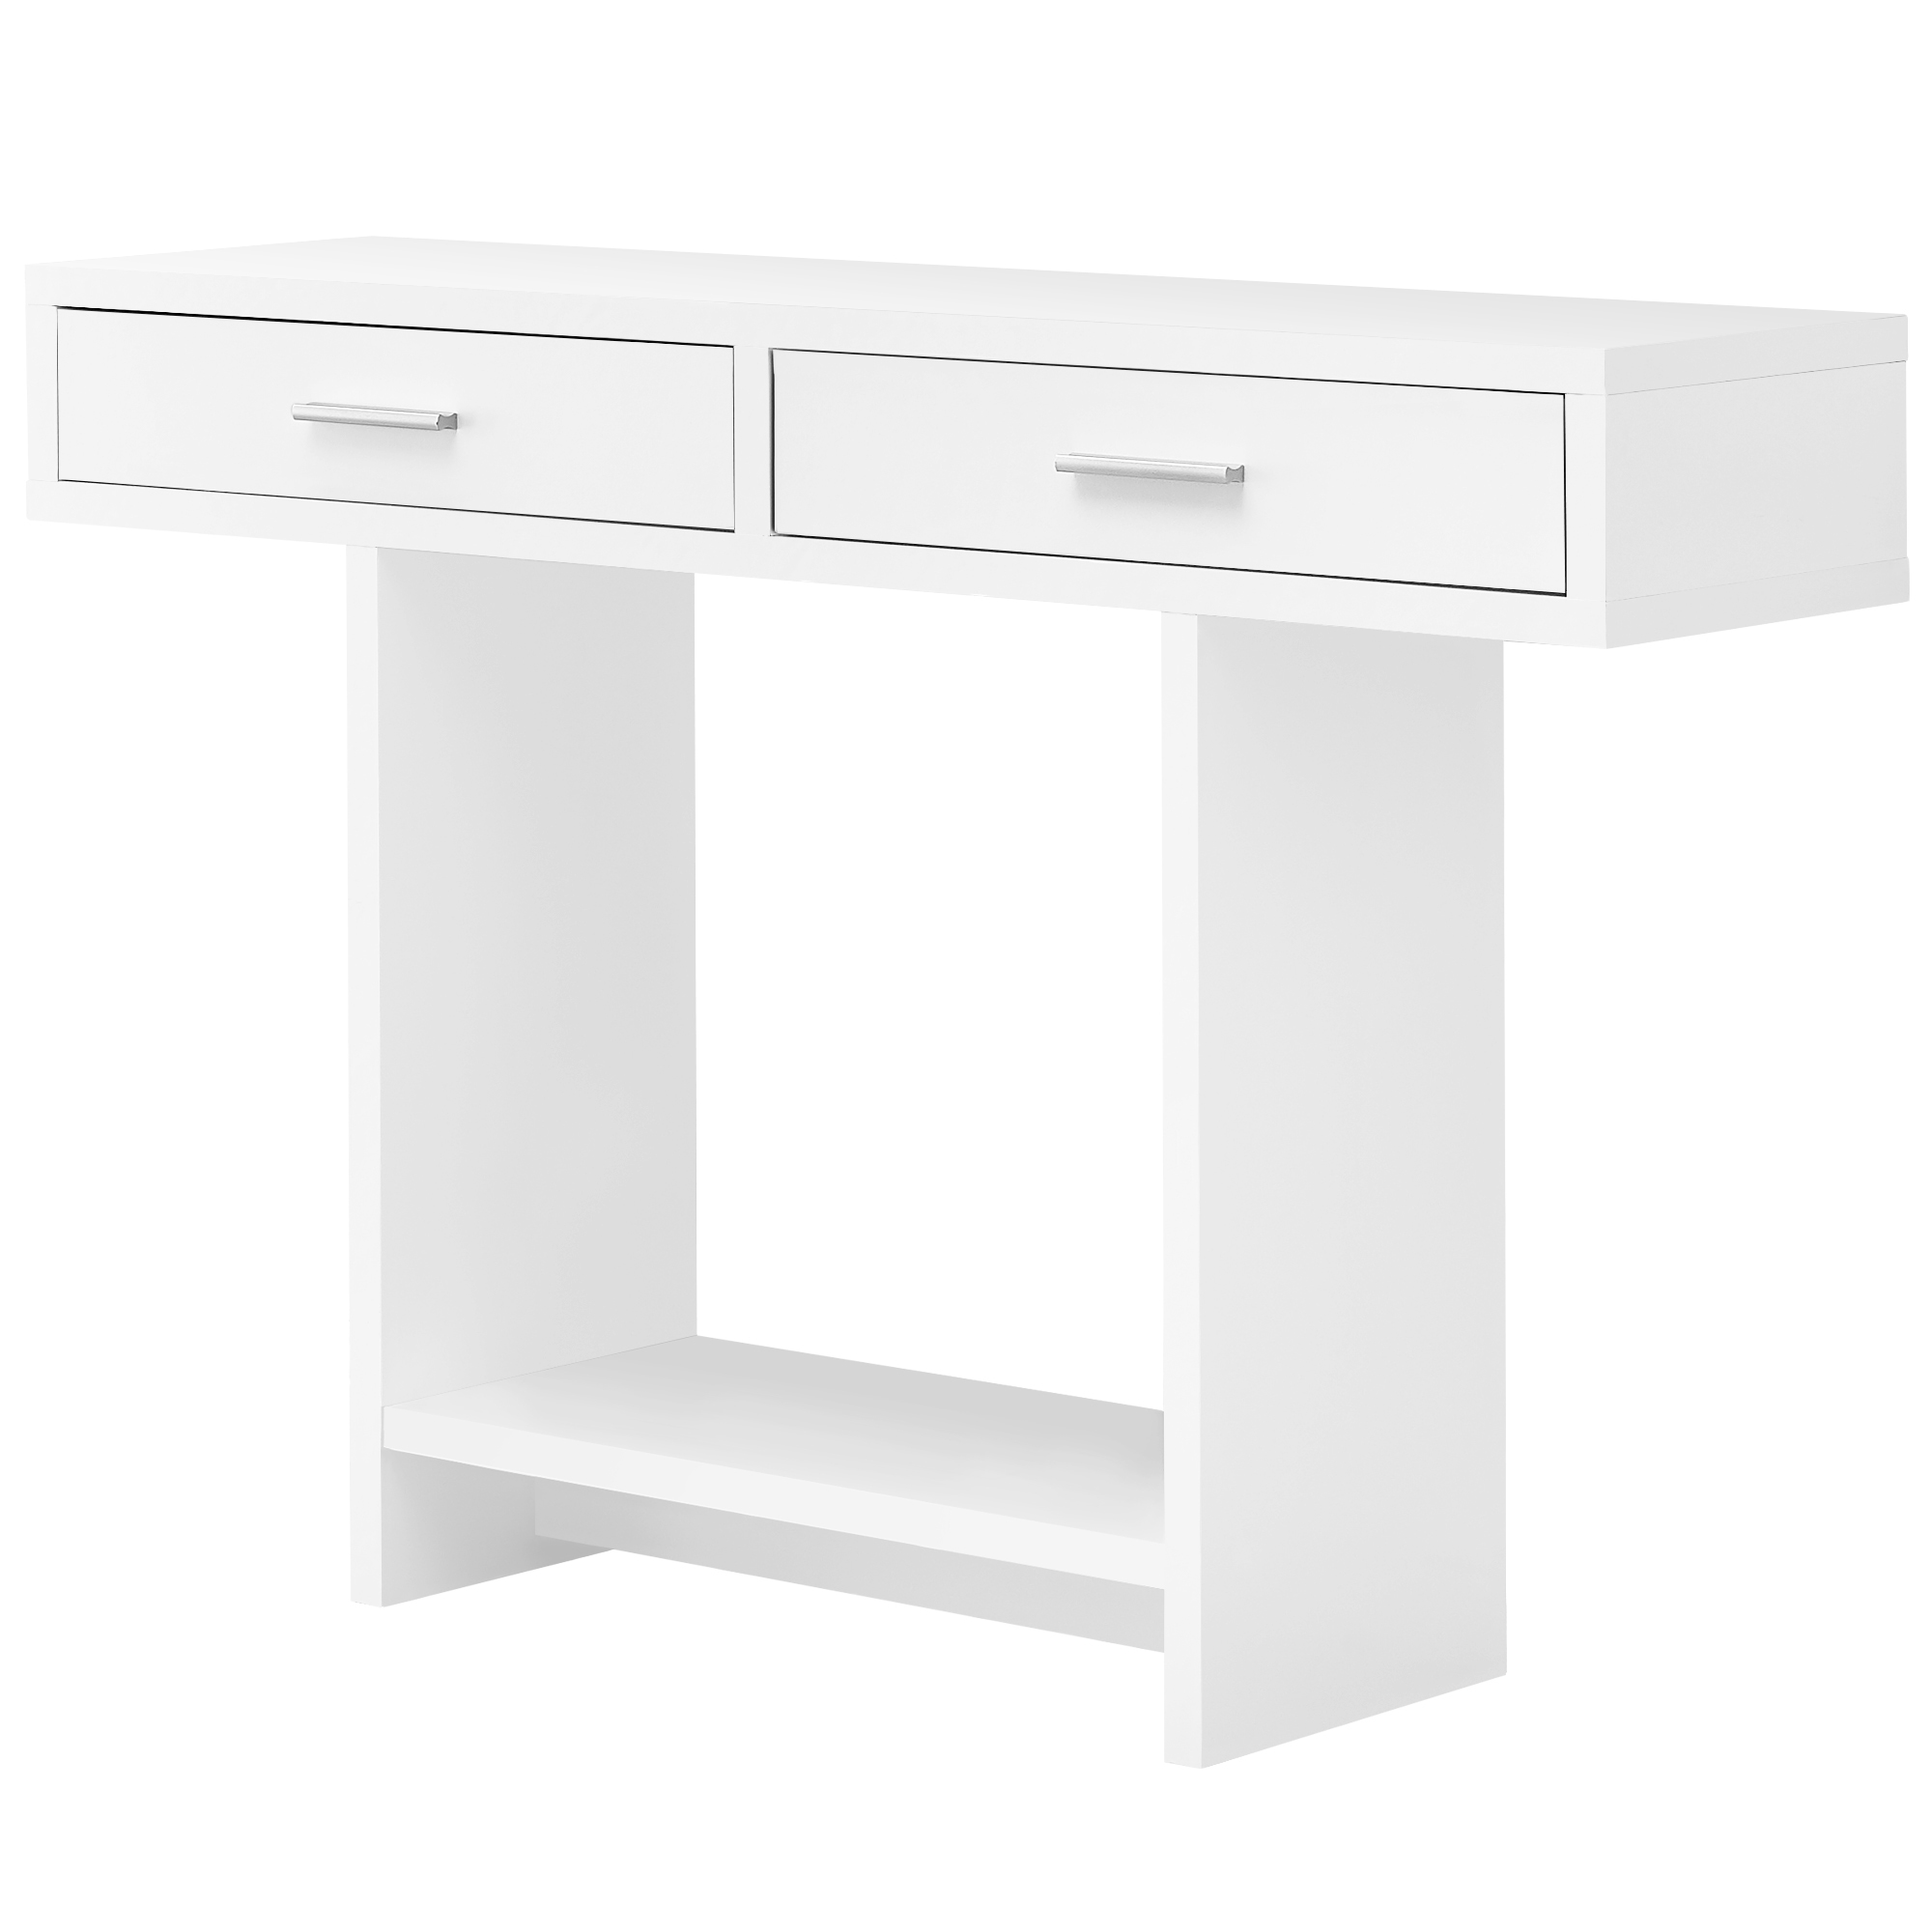 12.25" x 47.25" x 32" White Particle Board Hollow Core Accent Table with a Hollow Core and 2 Drawers